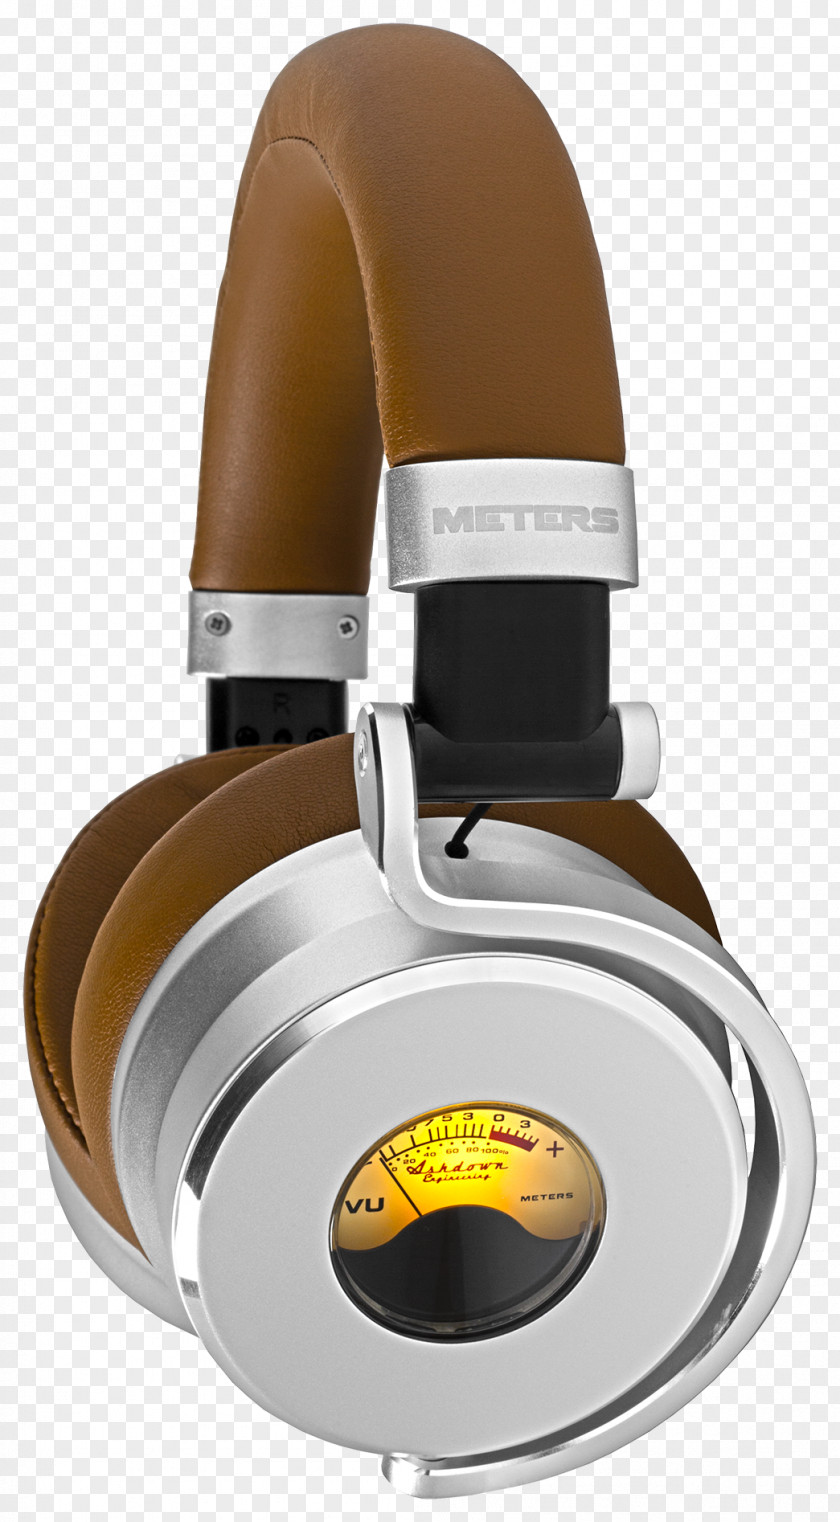 Yunnan Gleditsia Meters 18 0 1 Noise-cancelling Headphones Audio Sound Active Noise Control PNG